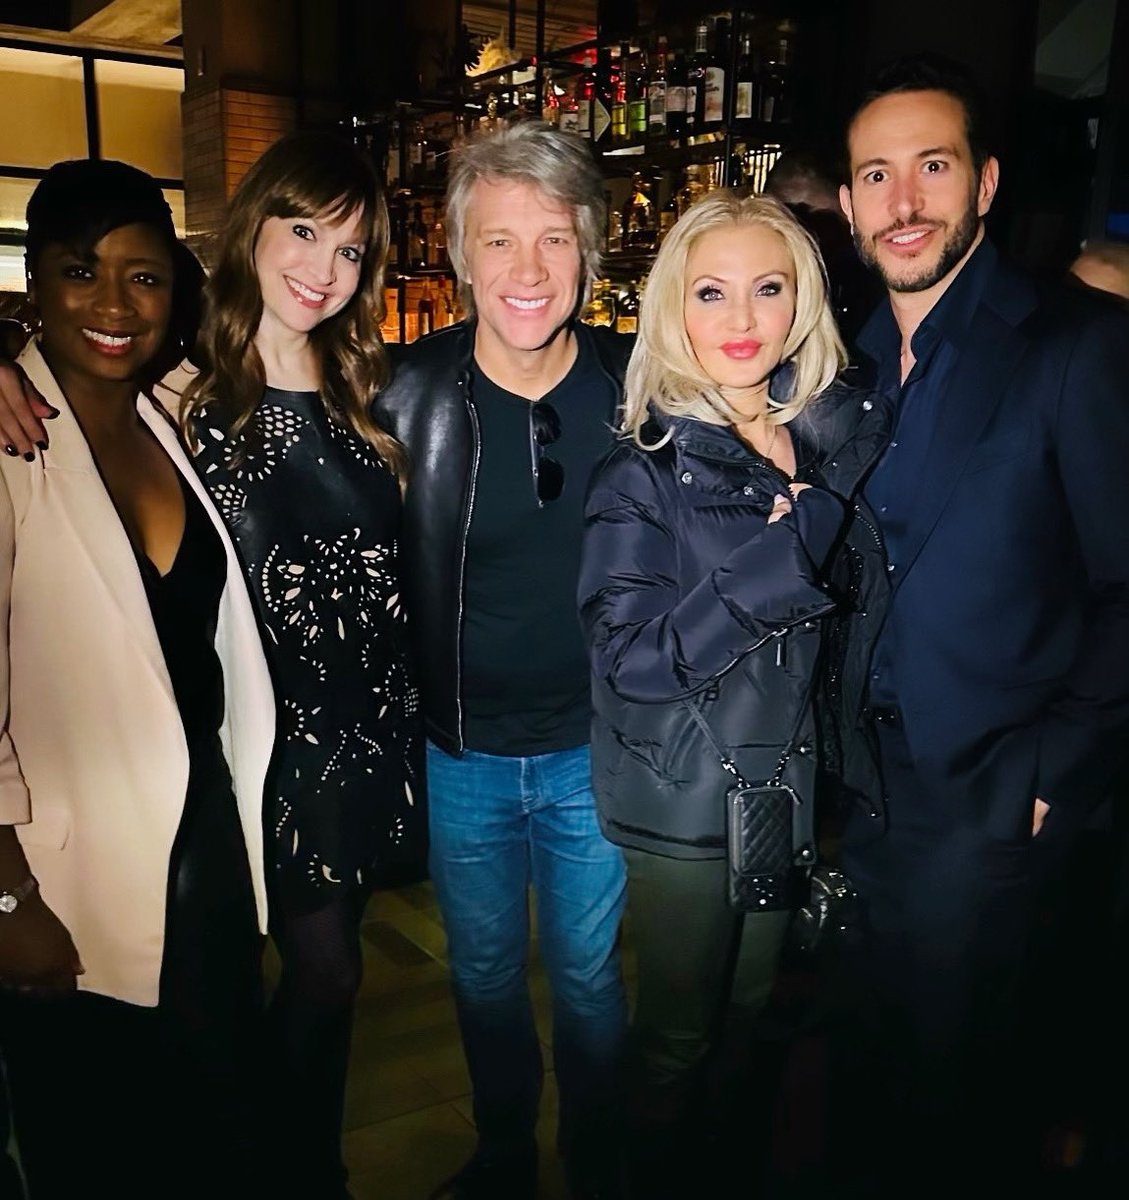 Had a blast at the cinema society premiere of the new Hulu doc Thank you, Goodnight, The Bon Jovi Story. All episodes dropped today. Highly recommend. @BonJovi @hulu @montegoglover @official_orfeh @jonbonjovi #cinemasociety #BonJovi